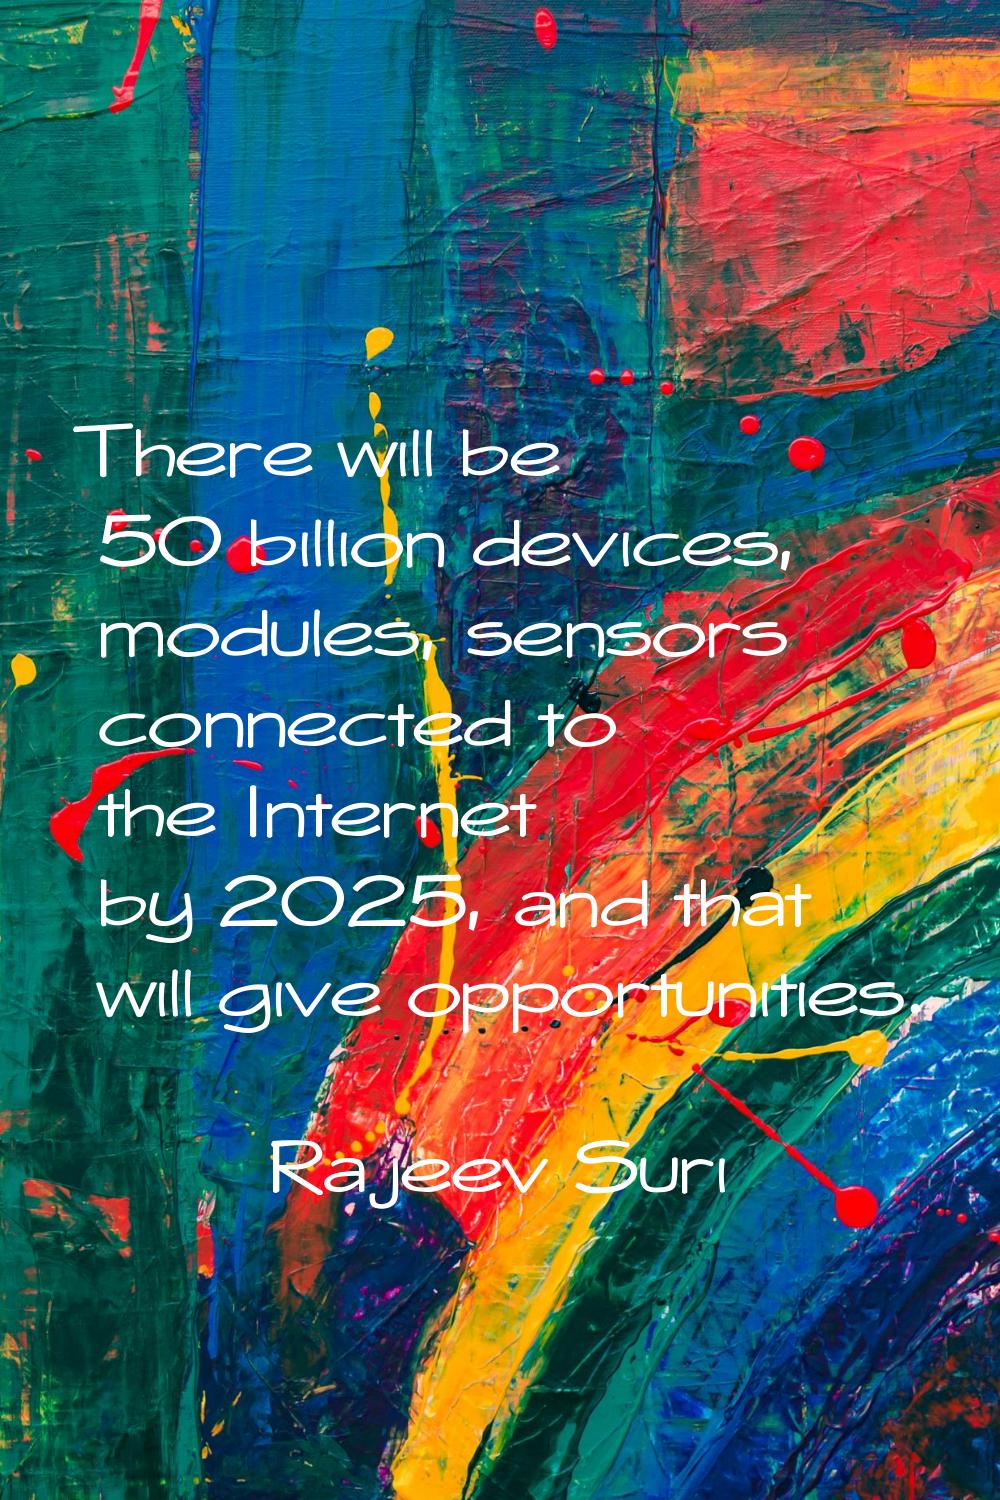 There will be 50 billion devices, modules, sensors connected to the Internet by 2025, and that will